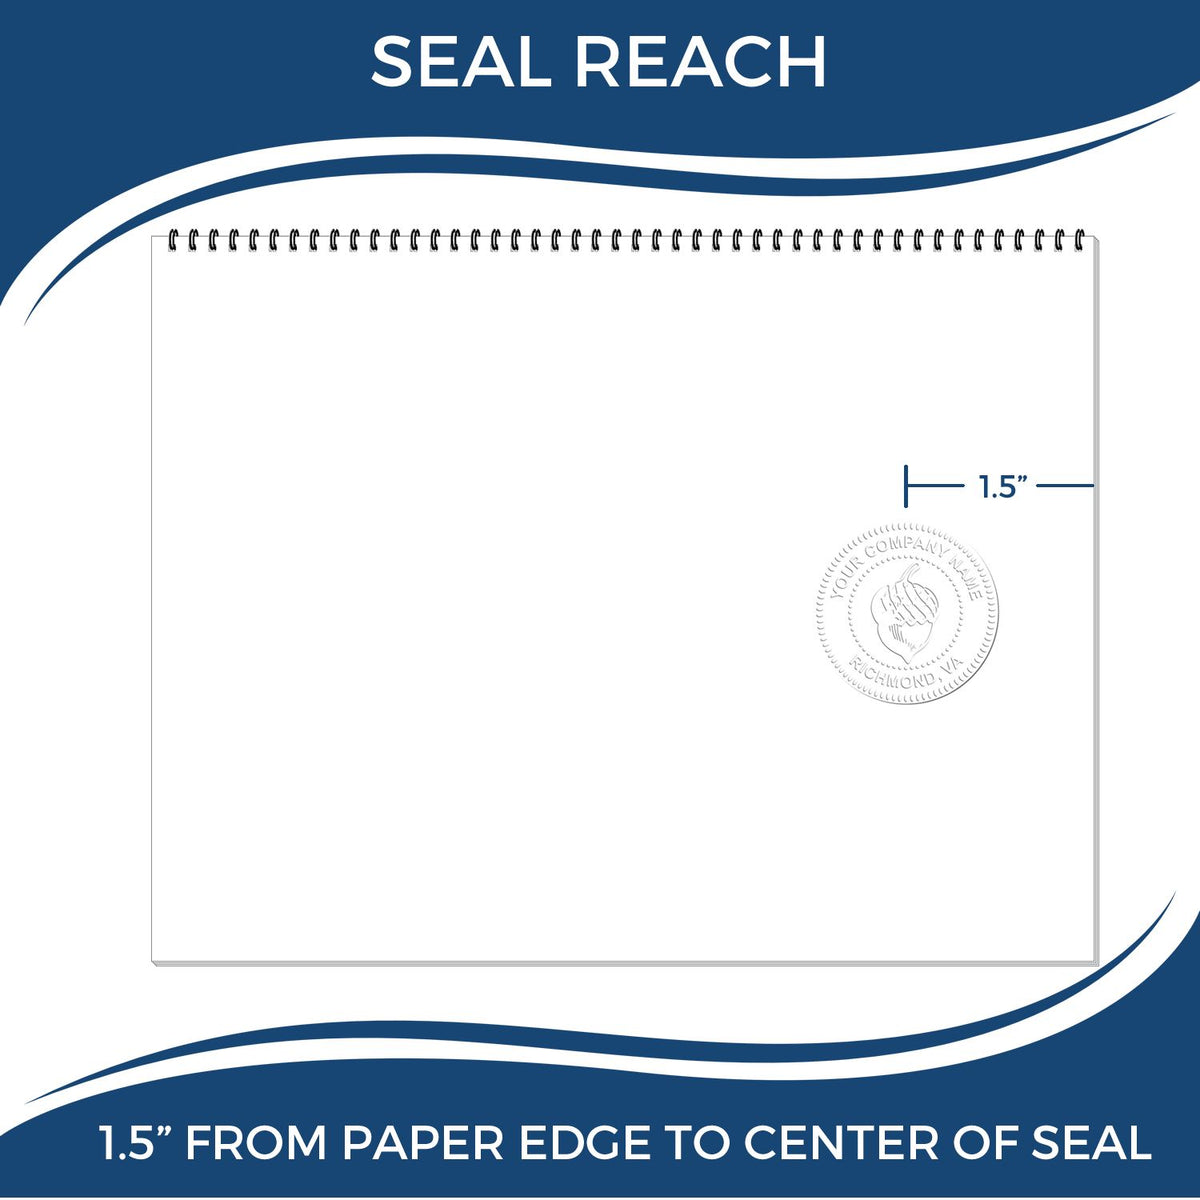 An infographic showing the seal reach which is represented by a ruler and a miniature seal image of the Handheld New Mexico Professional Geologist Embosser